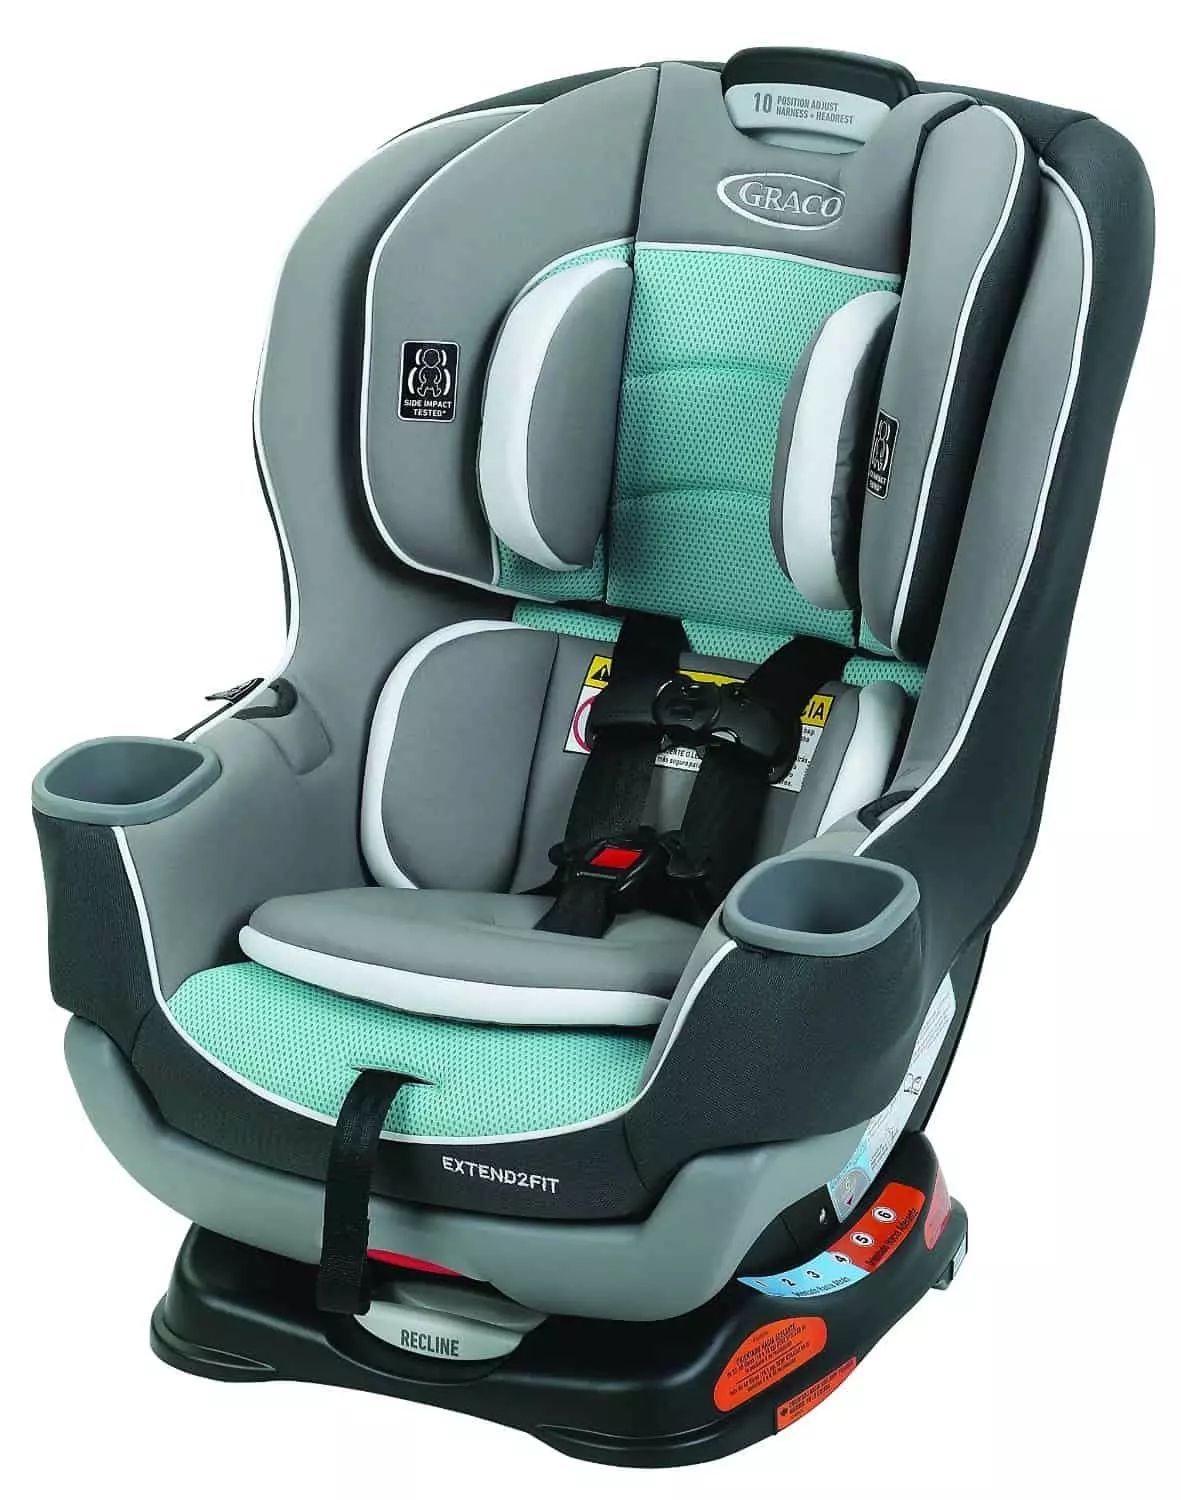 Convertible Car Seat Review: Graco Extend2Fit | Baby Bargains